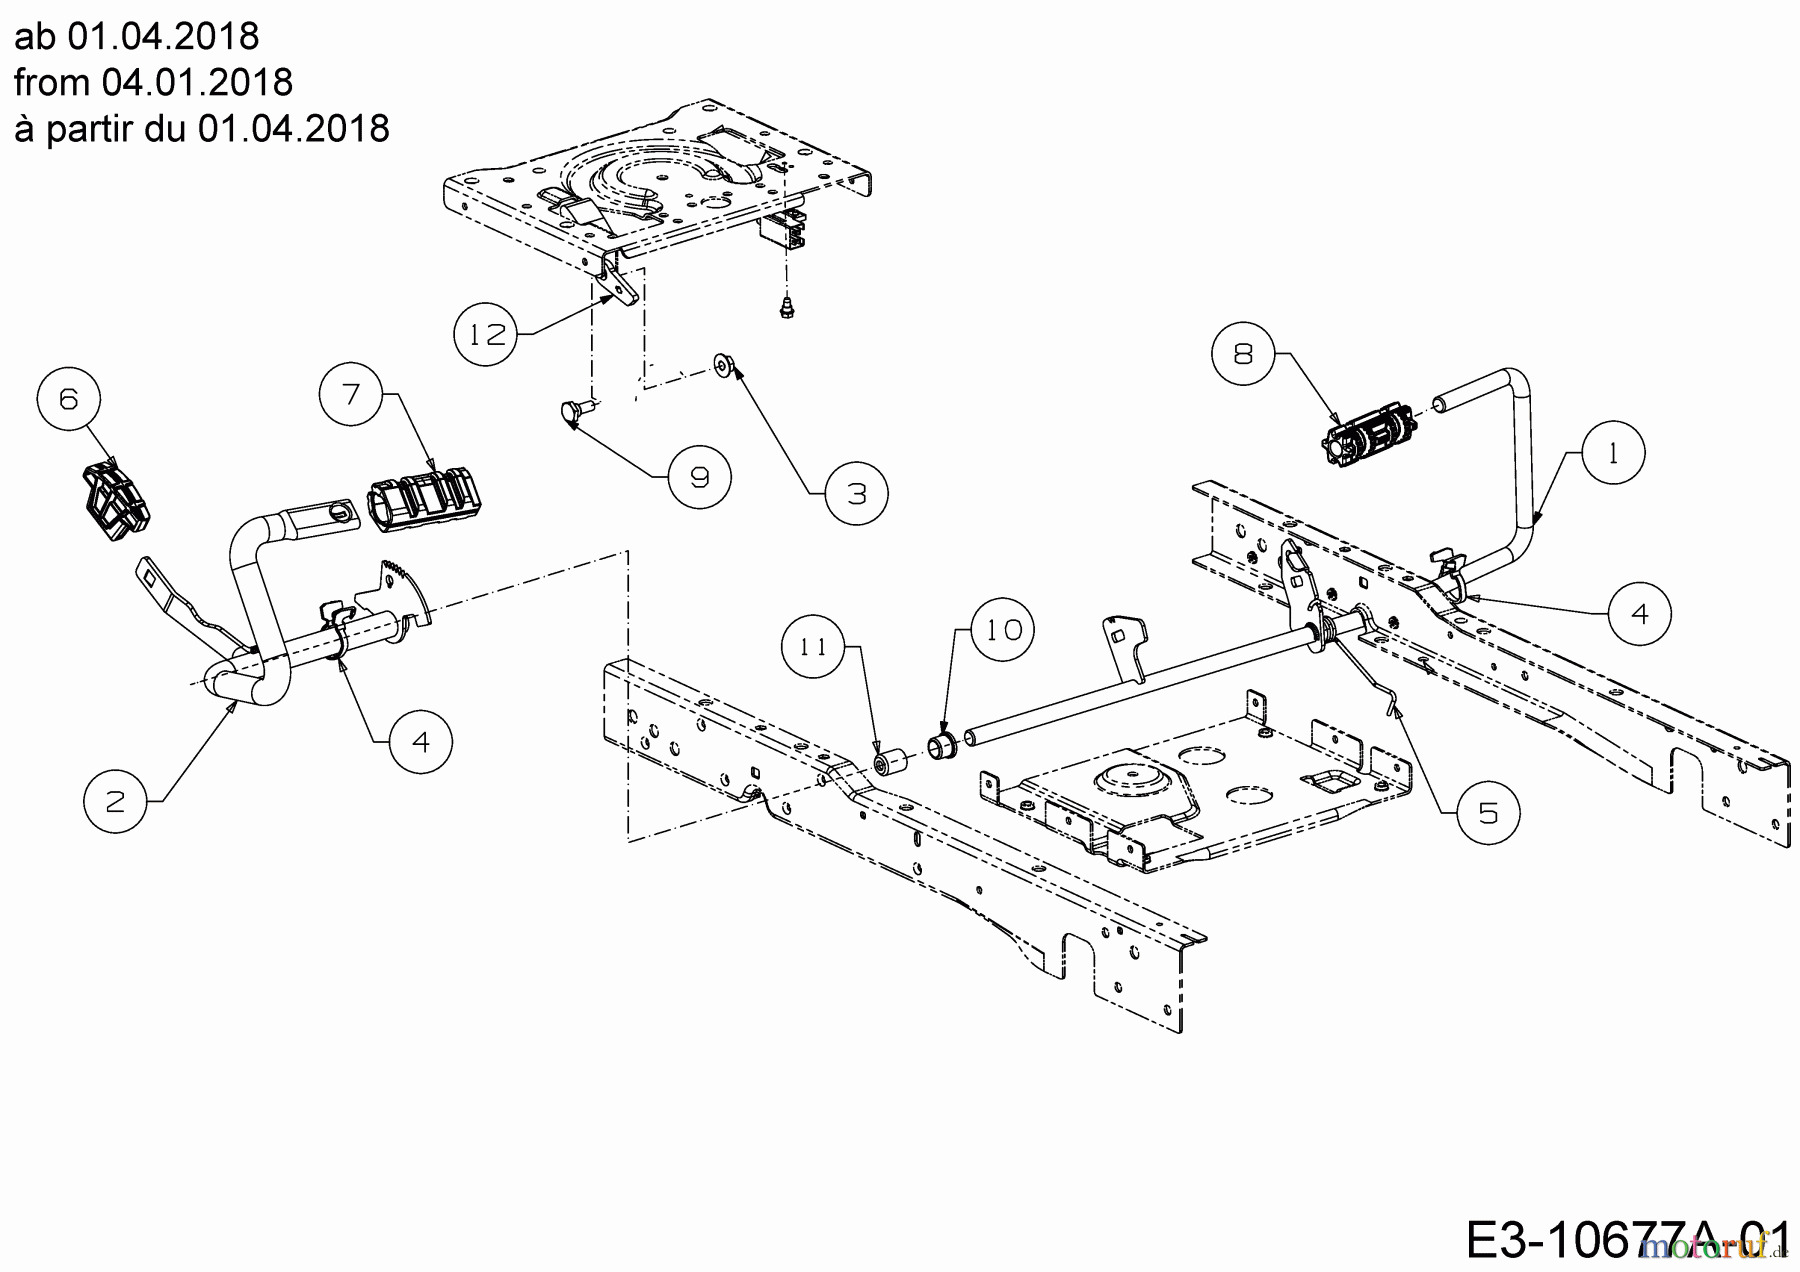  Greenbase Lawn tractors V 162 C 13A8A1KF618 (2019) Pedals from 04.01.2018